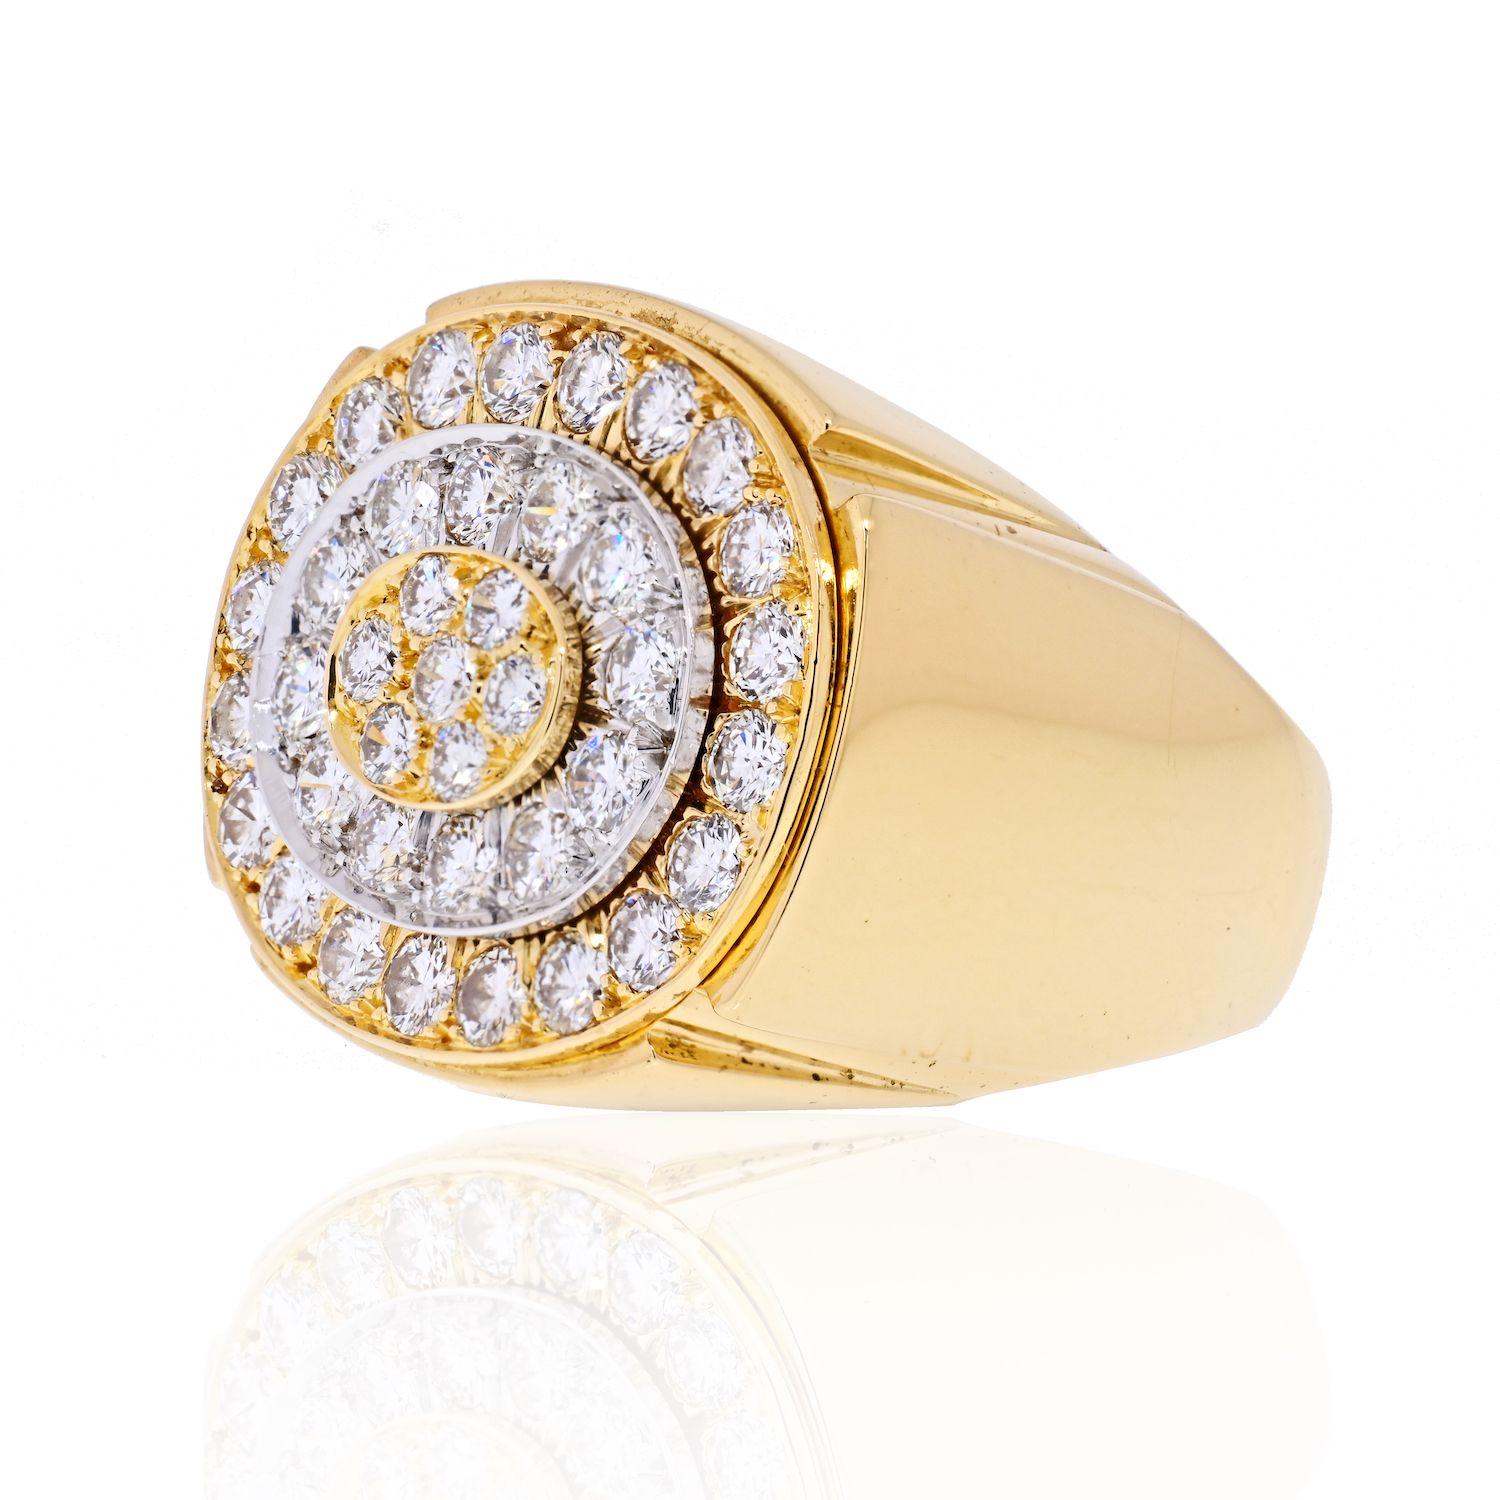 Chunky statement ring is designed as an oval mounting with stepped tiers of gold alternating with platinum. Pavé and bead set throughout by round brilliant cut diamonds weighing approximately 4.50 carats total; G/H color with VS clarity. 
Size 7.5
